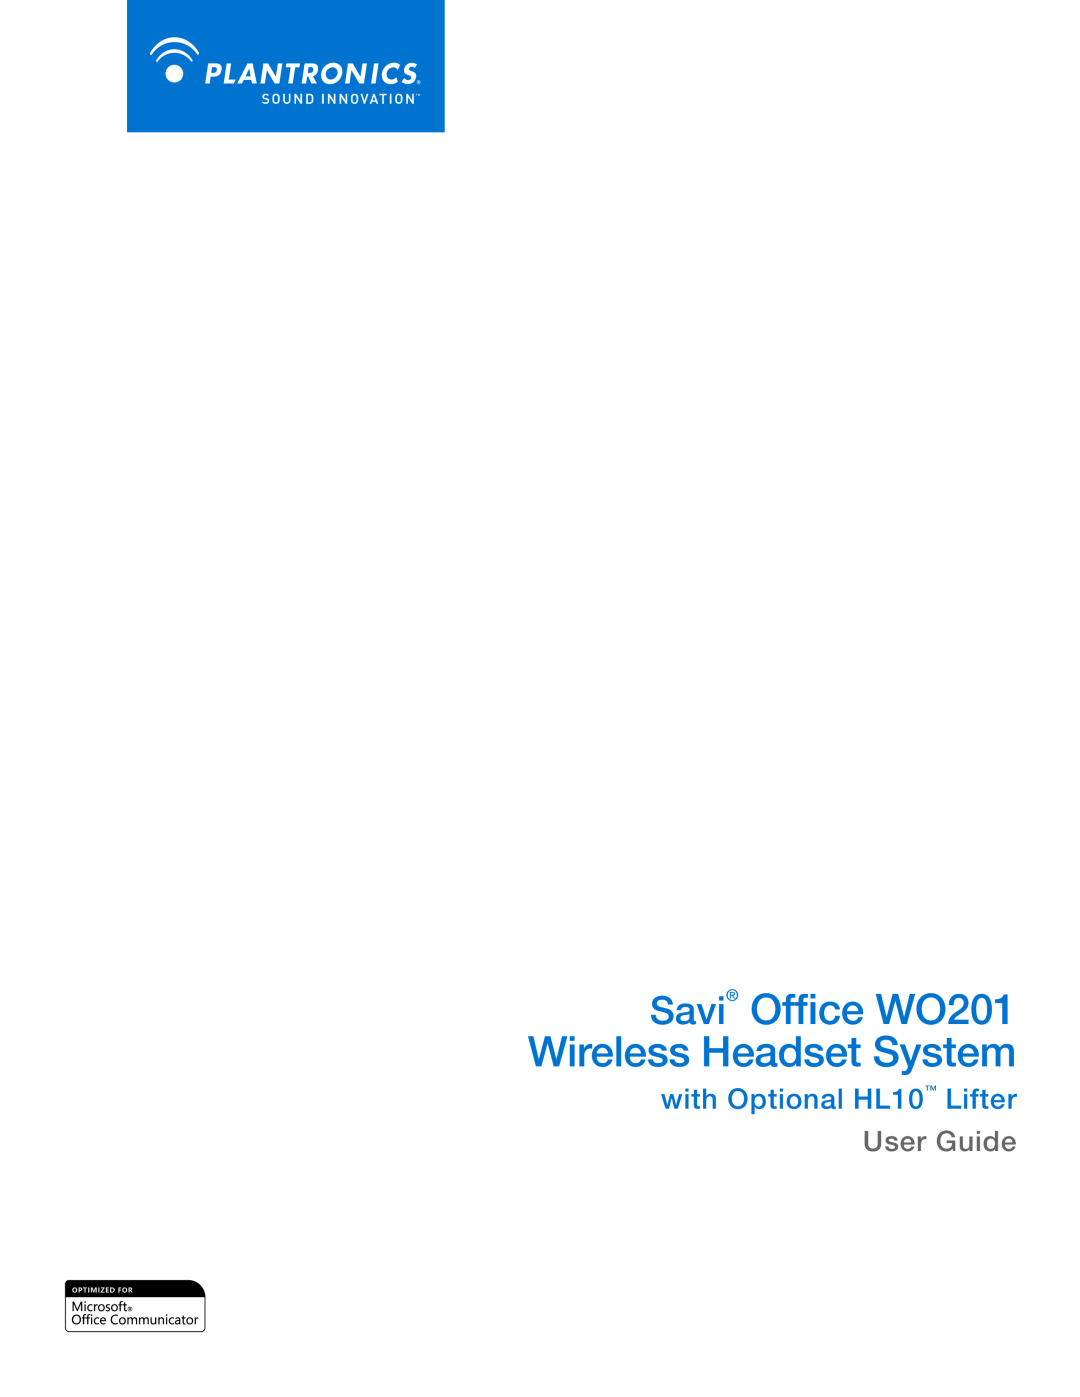 Plantronics manual Savi Office WO201 Wireless Headset System, with Optional HL10 Lifter User Guide 